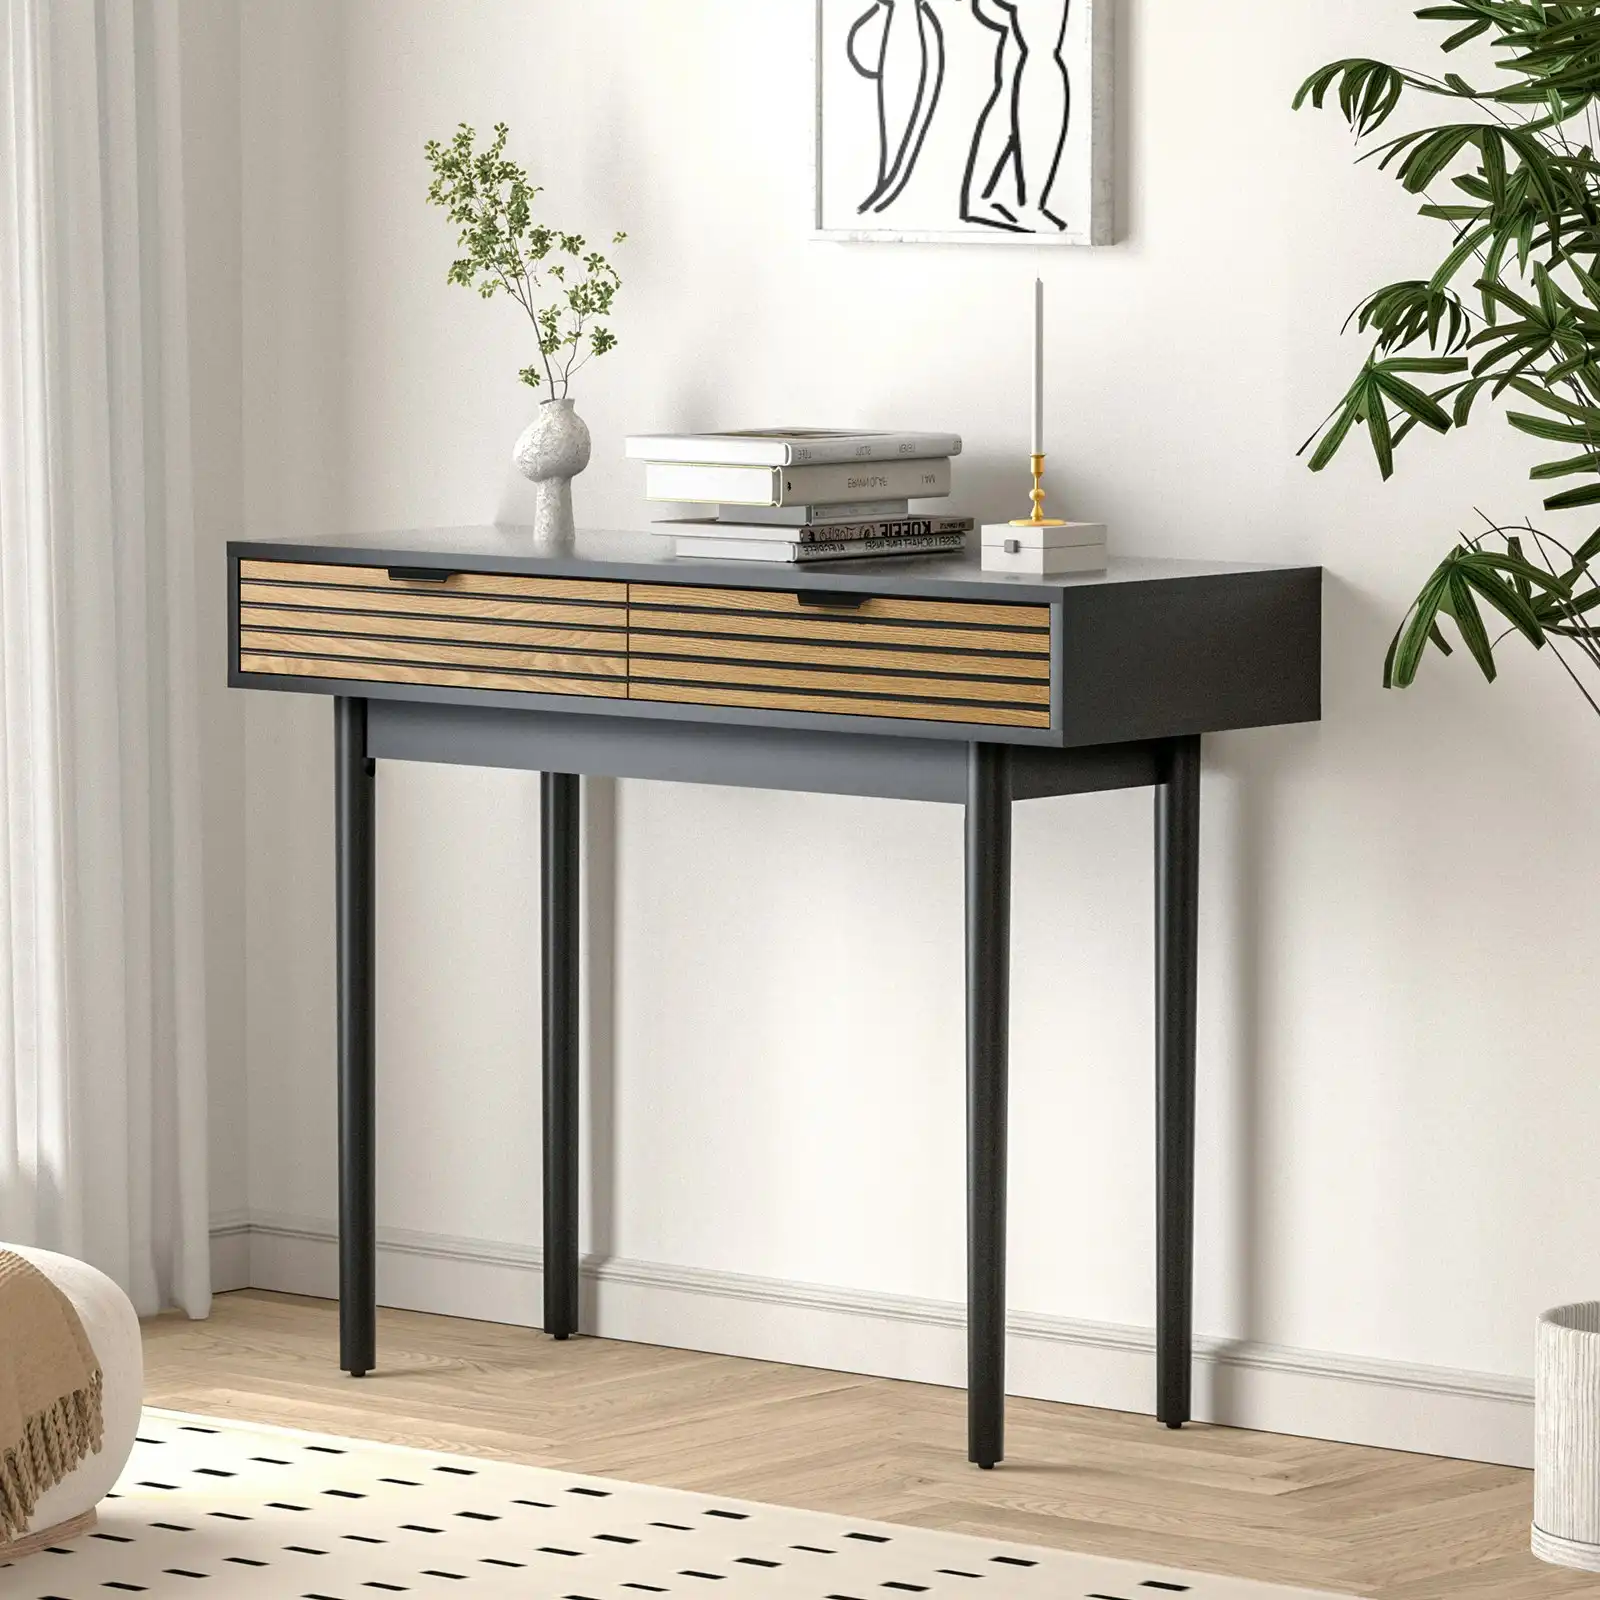 Oikiture Console Table Entry Hallway Side Table Display Desk w/Storage 2 Drawer Wood&Black